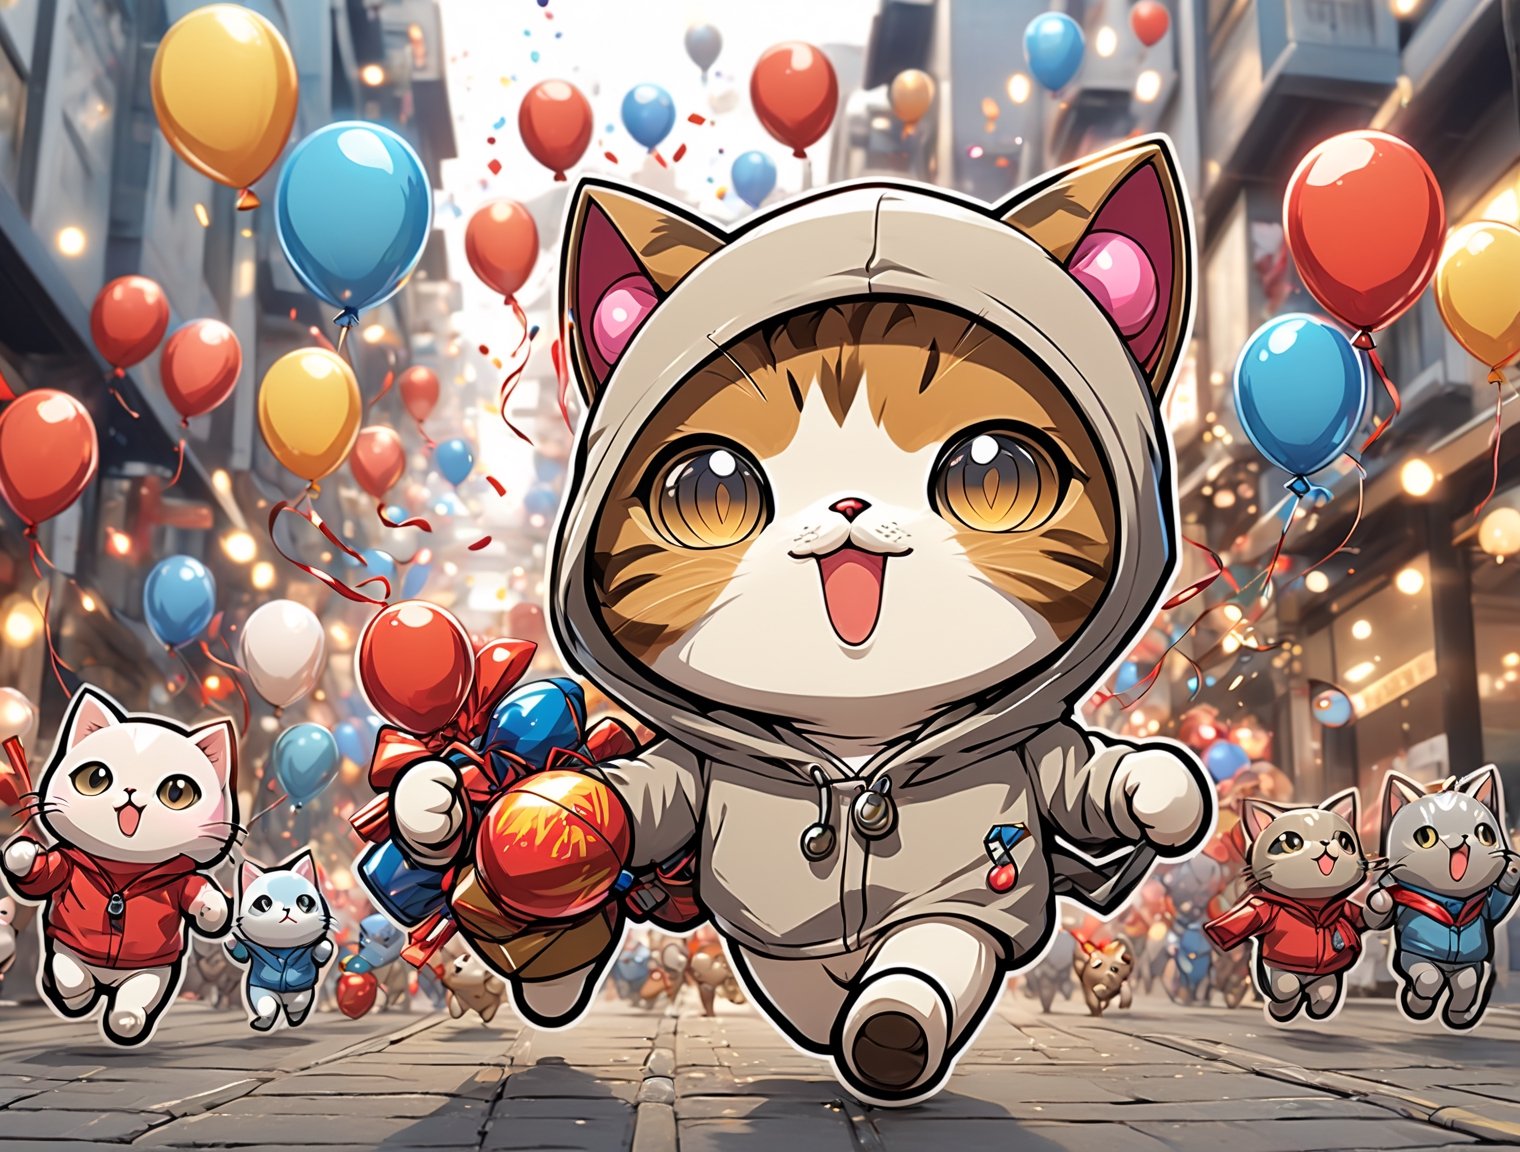 ((chibi style)), chibi cat in hoodie walking on busy street, new year setting, balloon and firecrackers, dynamic angle, depth of field, detail XL, closeup shot, finetune,ghibli,sticker